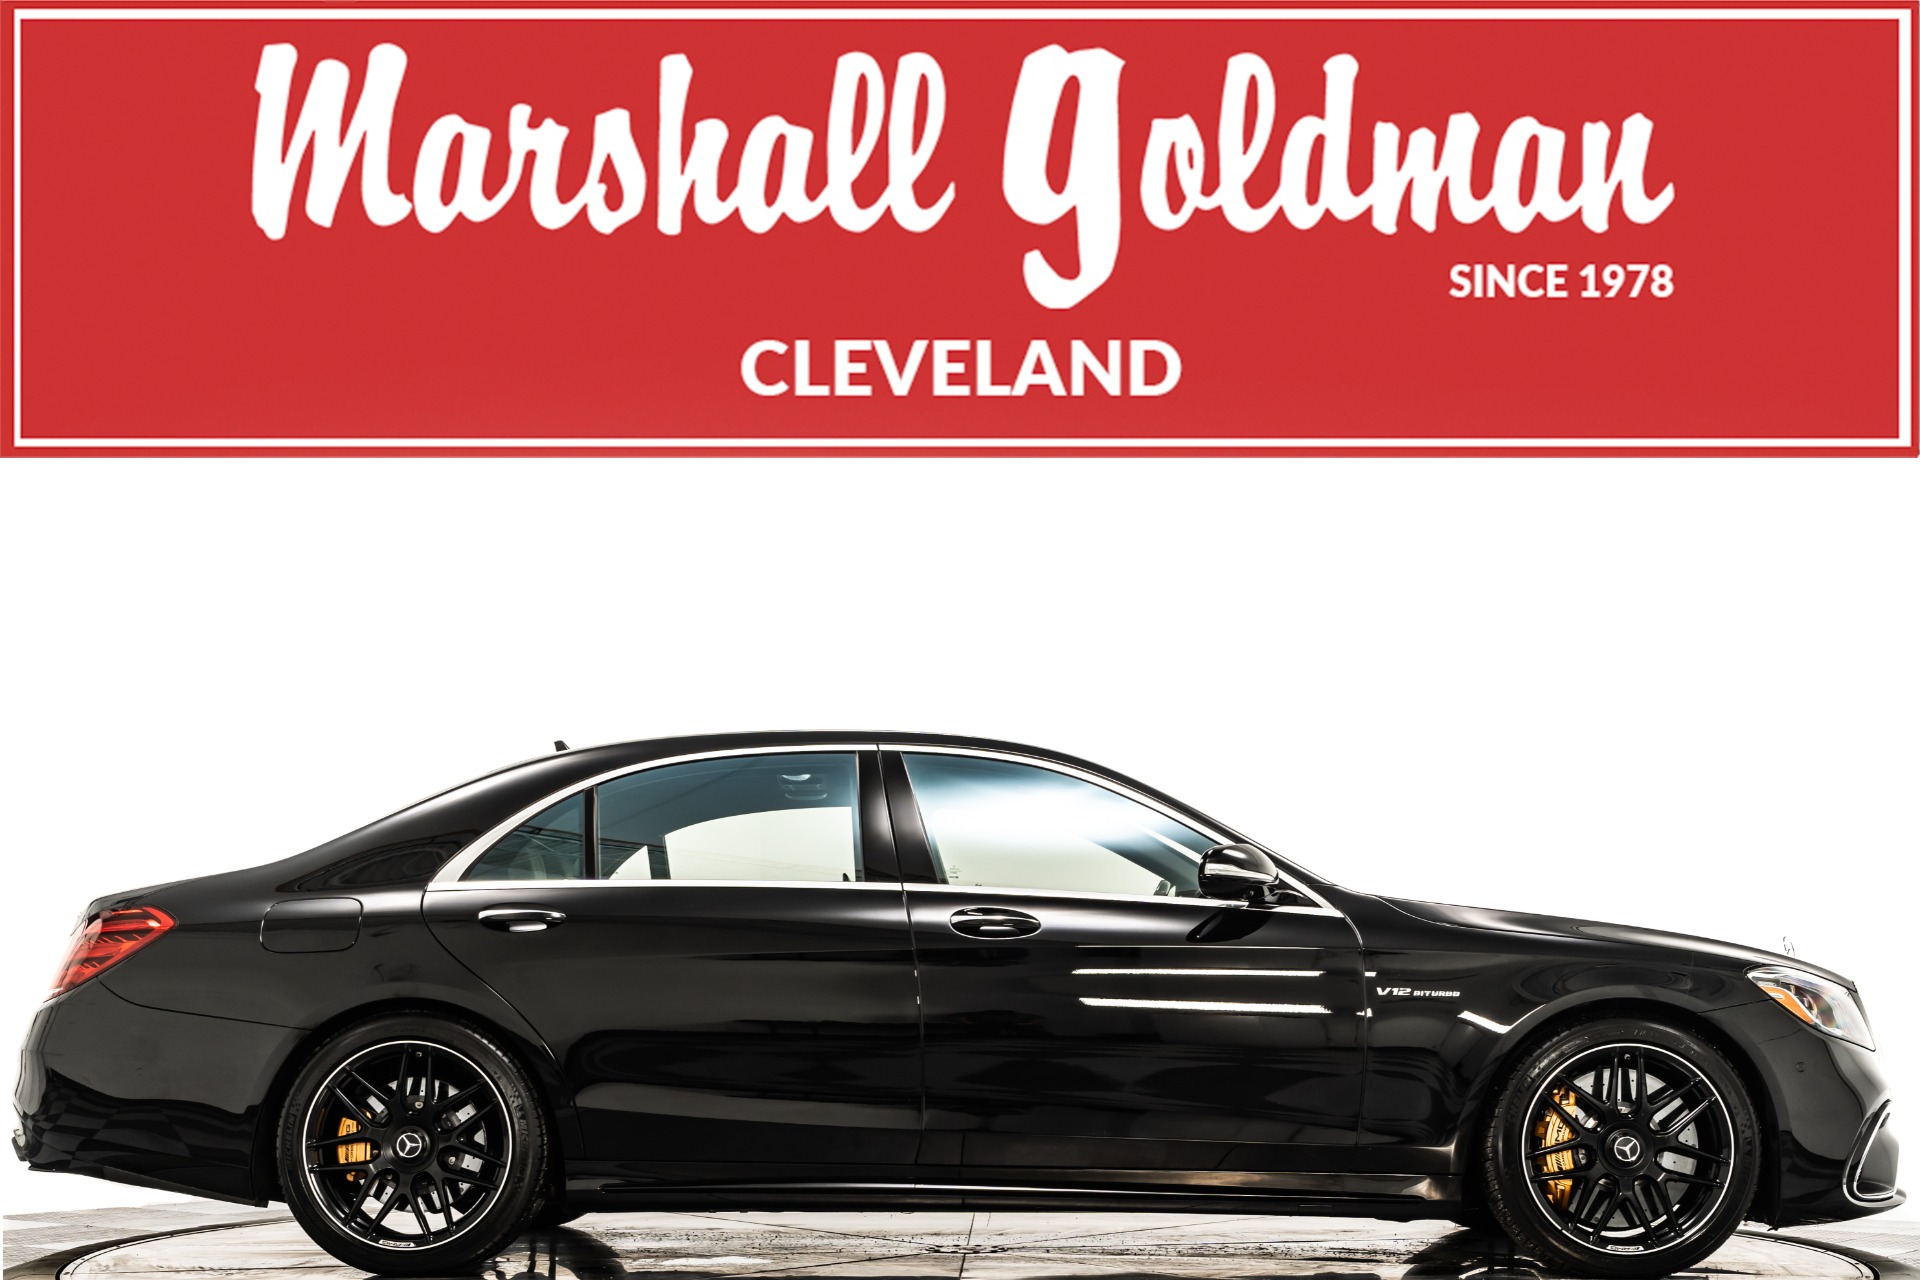 Used 2020 Mercedes-Benz S65 AMG For Sale (Sold) | Marshall Goldman  Cleveland Stock #WS65FLBL